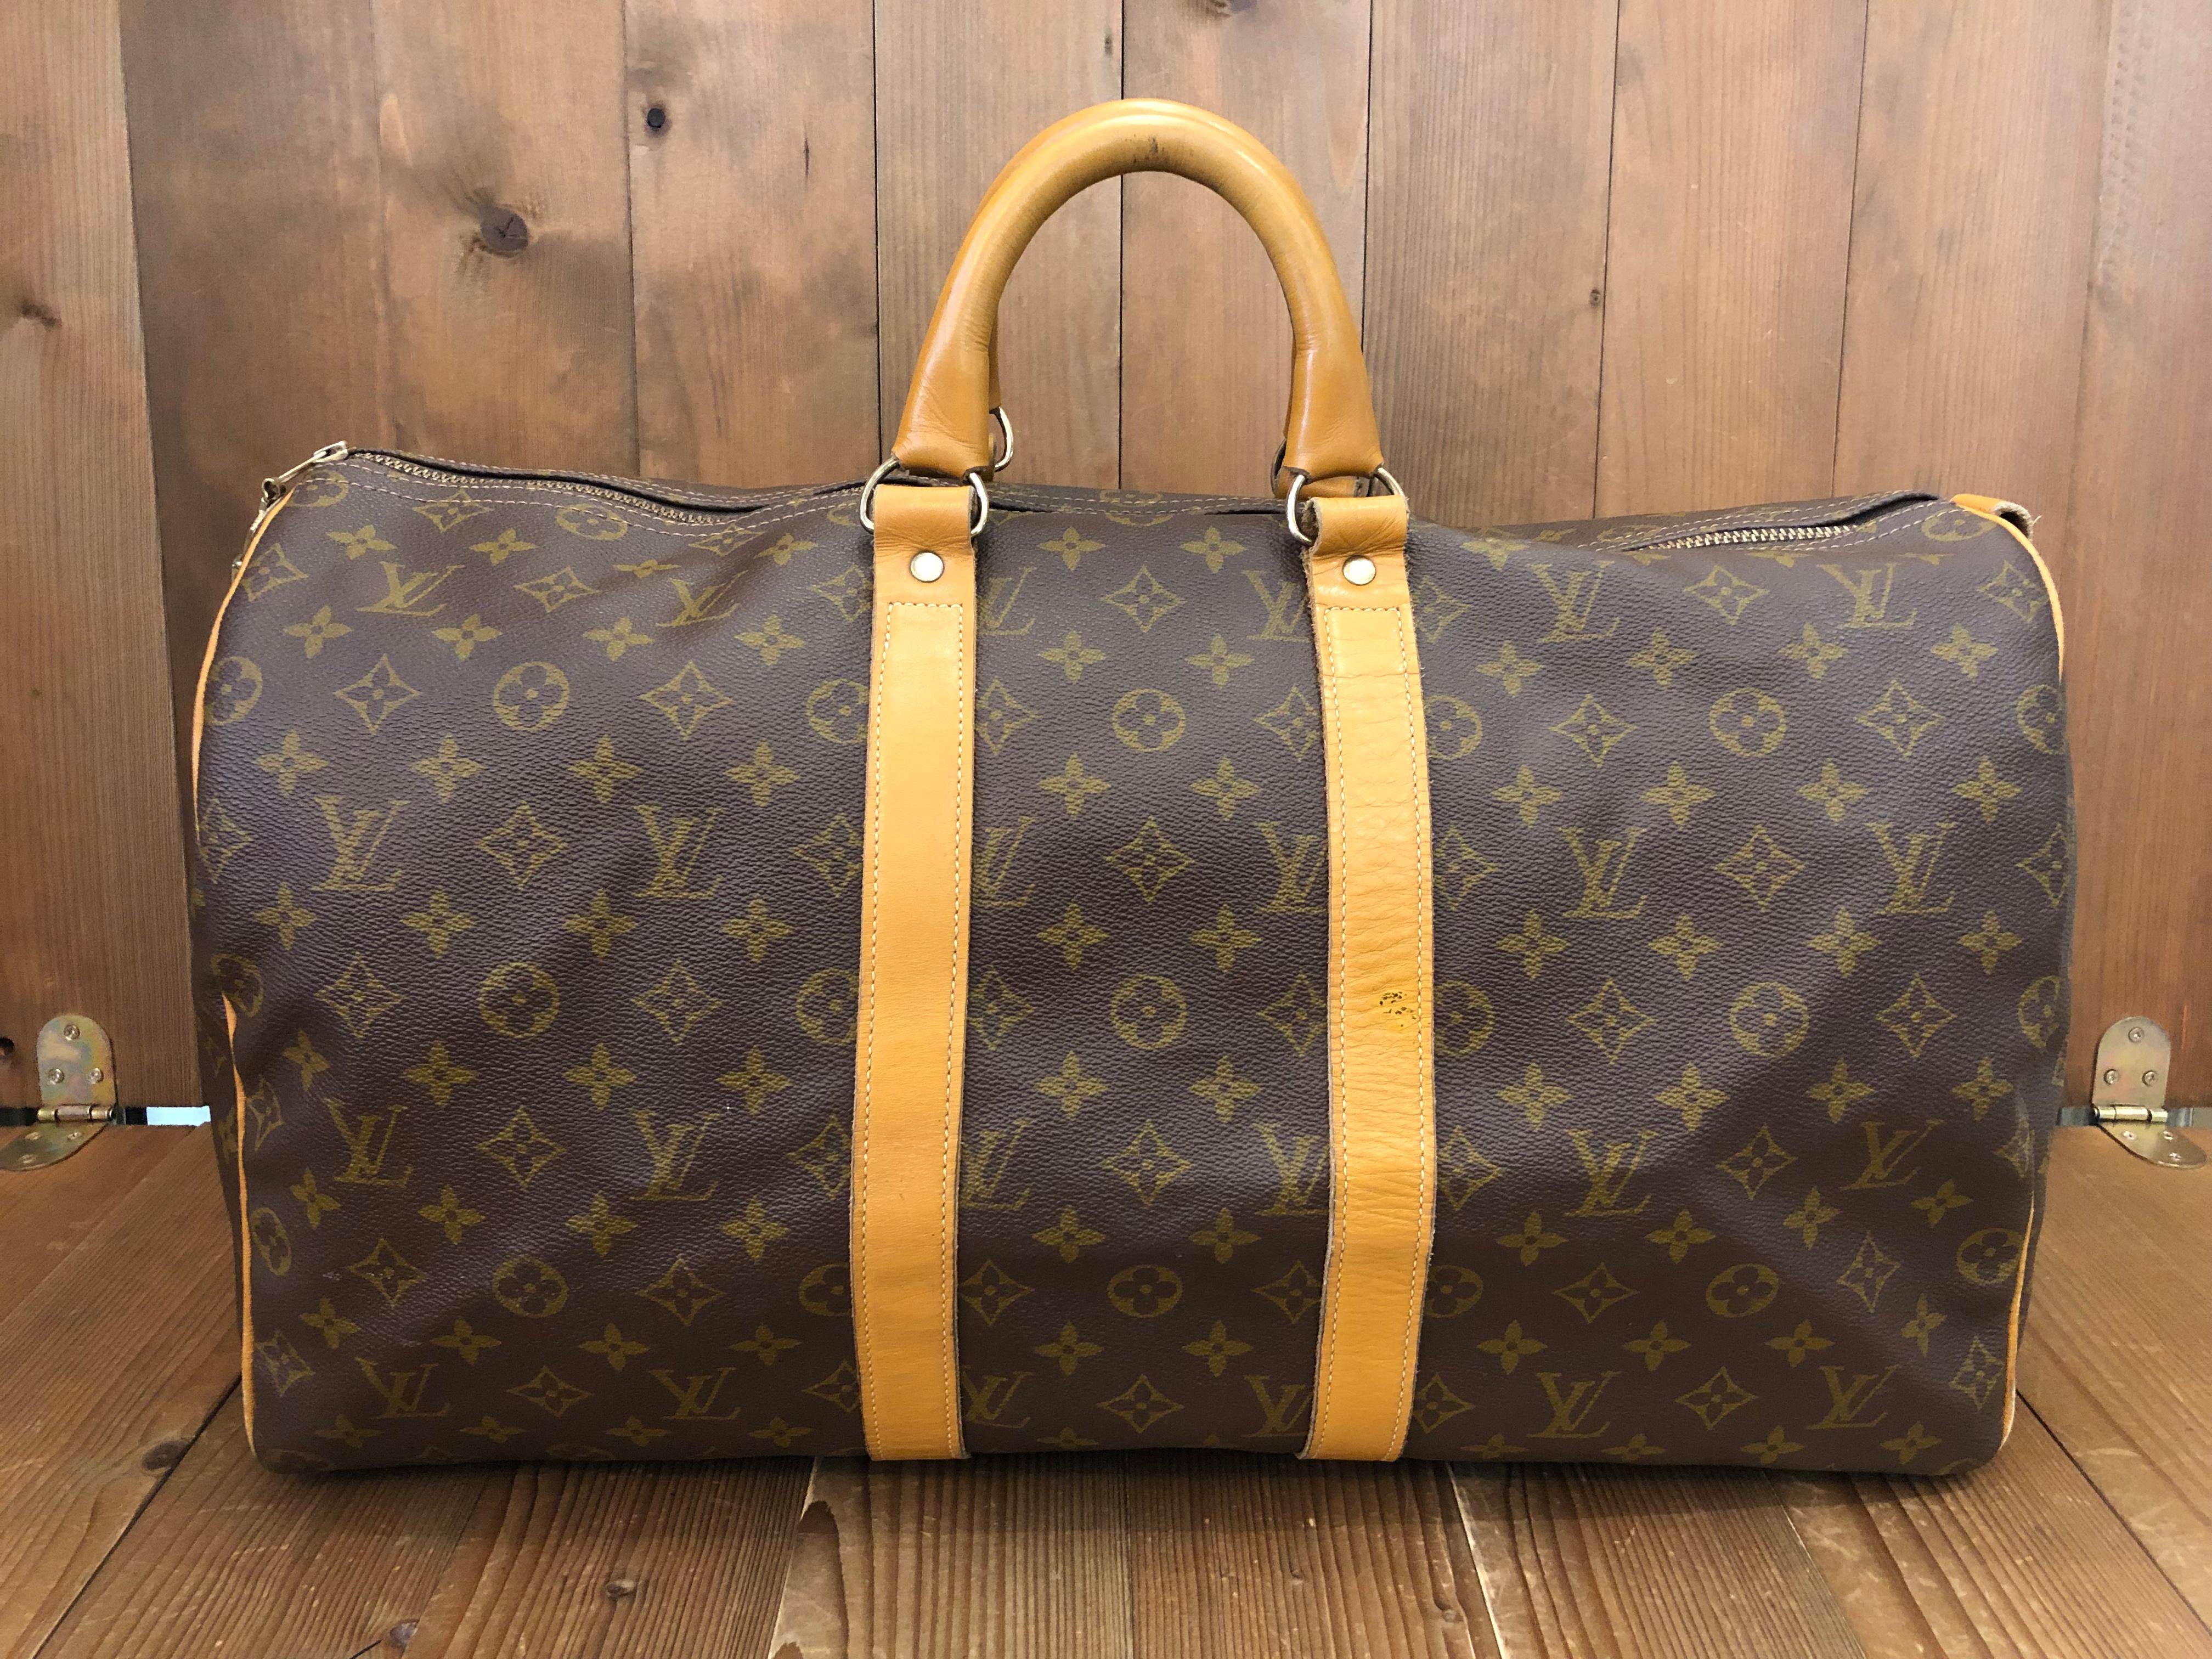 This rare 1970s vintage French Company LOUIS VUITTON Keepall 50 crafted of Louis Vuitton Monogram Canvas trimmed with brown treated leather, unlike the normal LV vachetta leather which ages and darkens with time, this brown leather stays the same